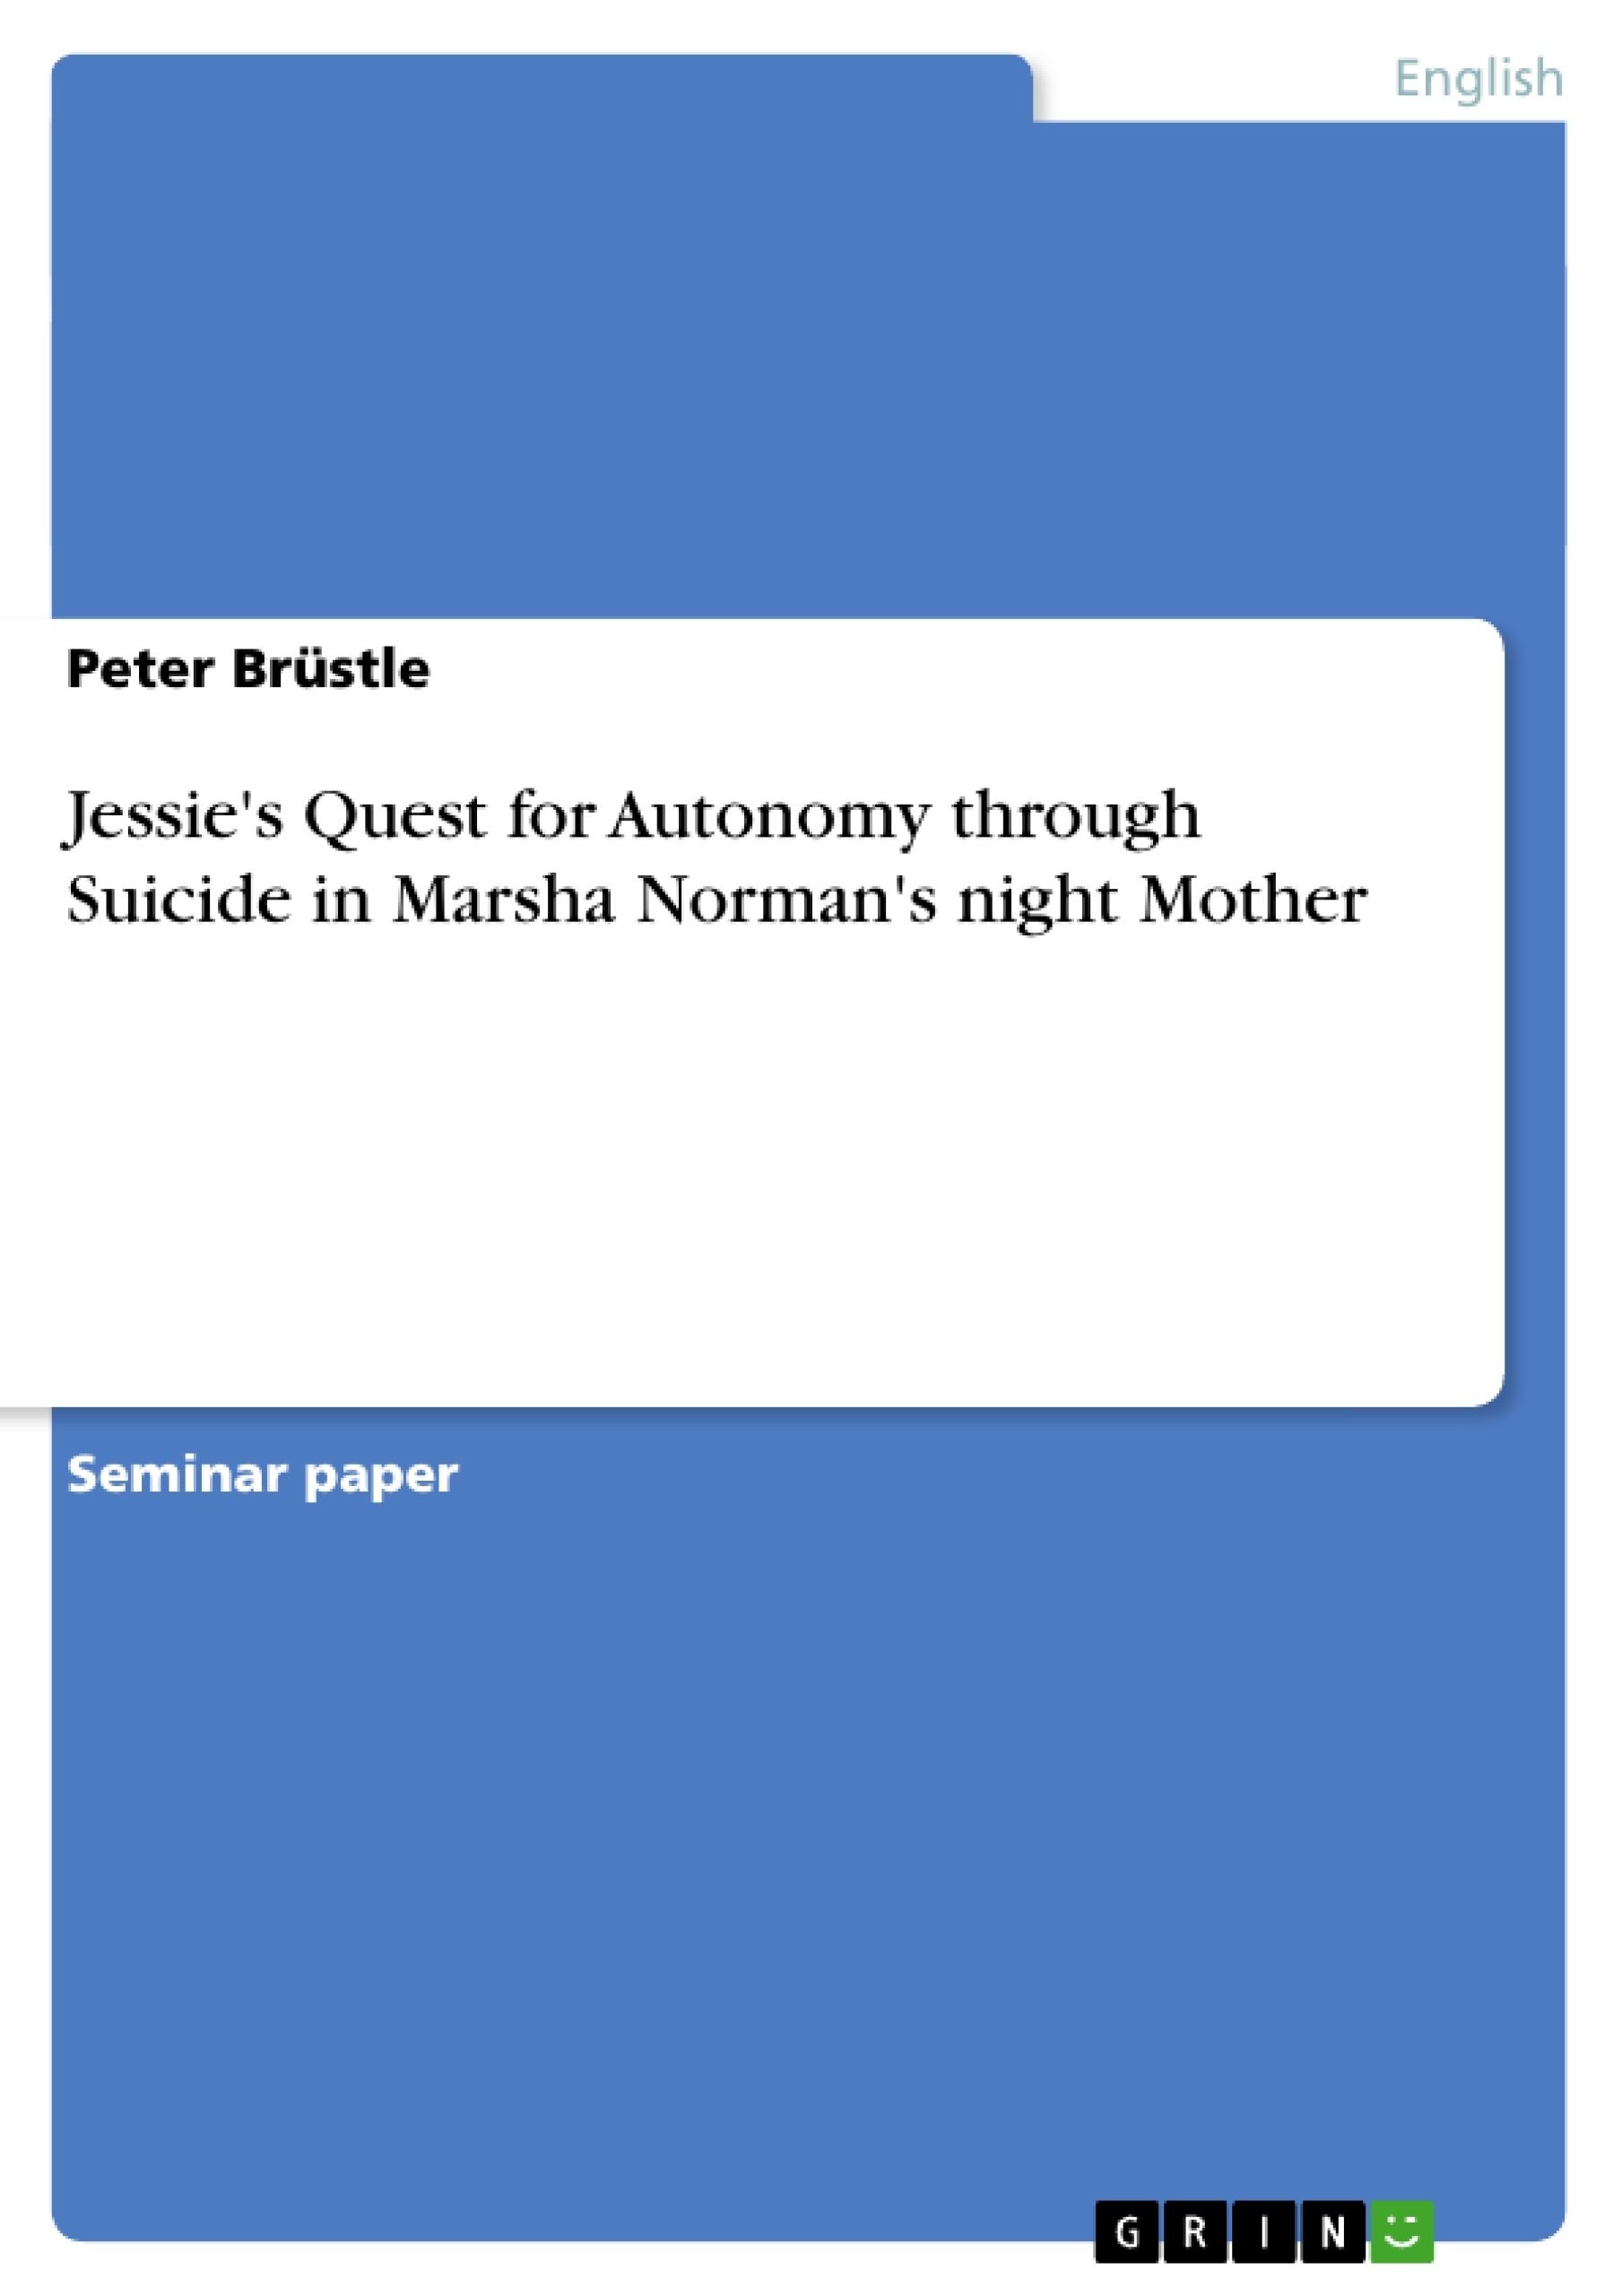 Title: Jessie's Quest for Autonomy through Suicide in Marsha Norman's night Mother